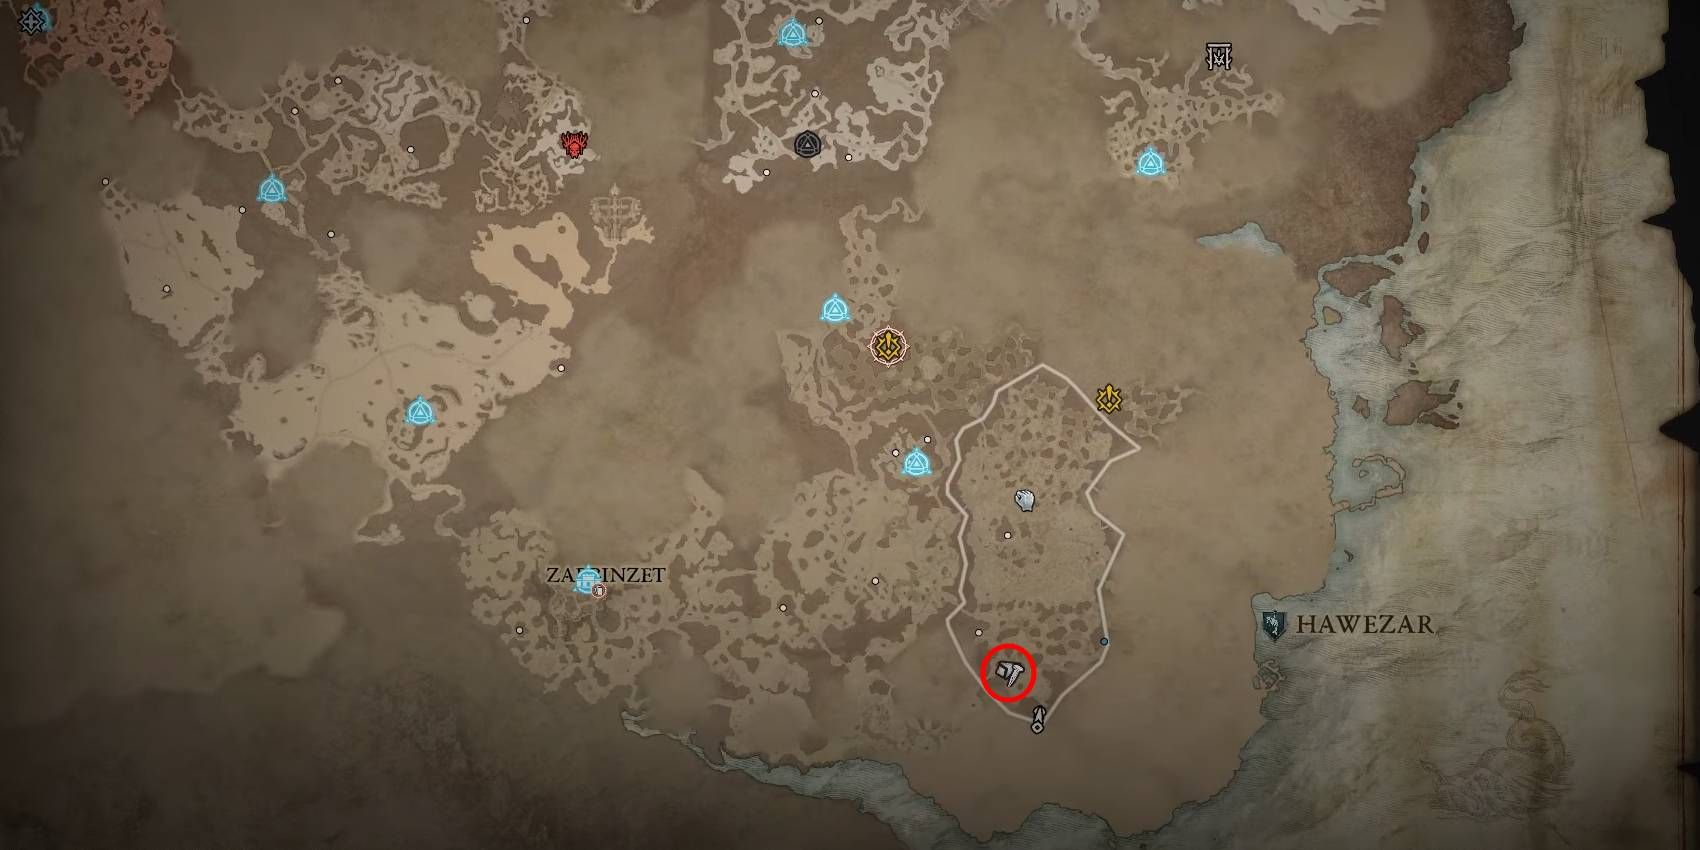 Diablo 4 Captain Willcocks Rare Elite Enemy Location Marked in Red Circle on Map